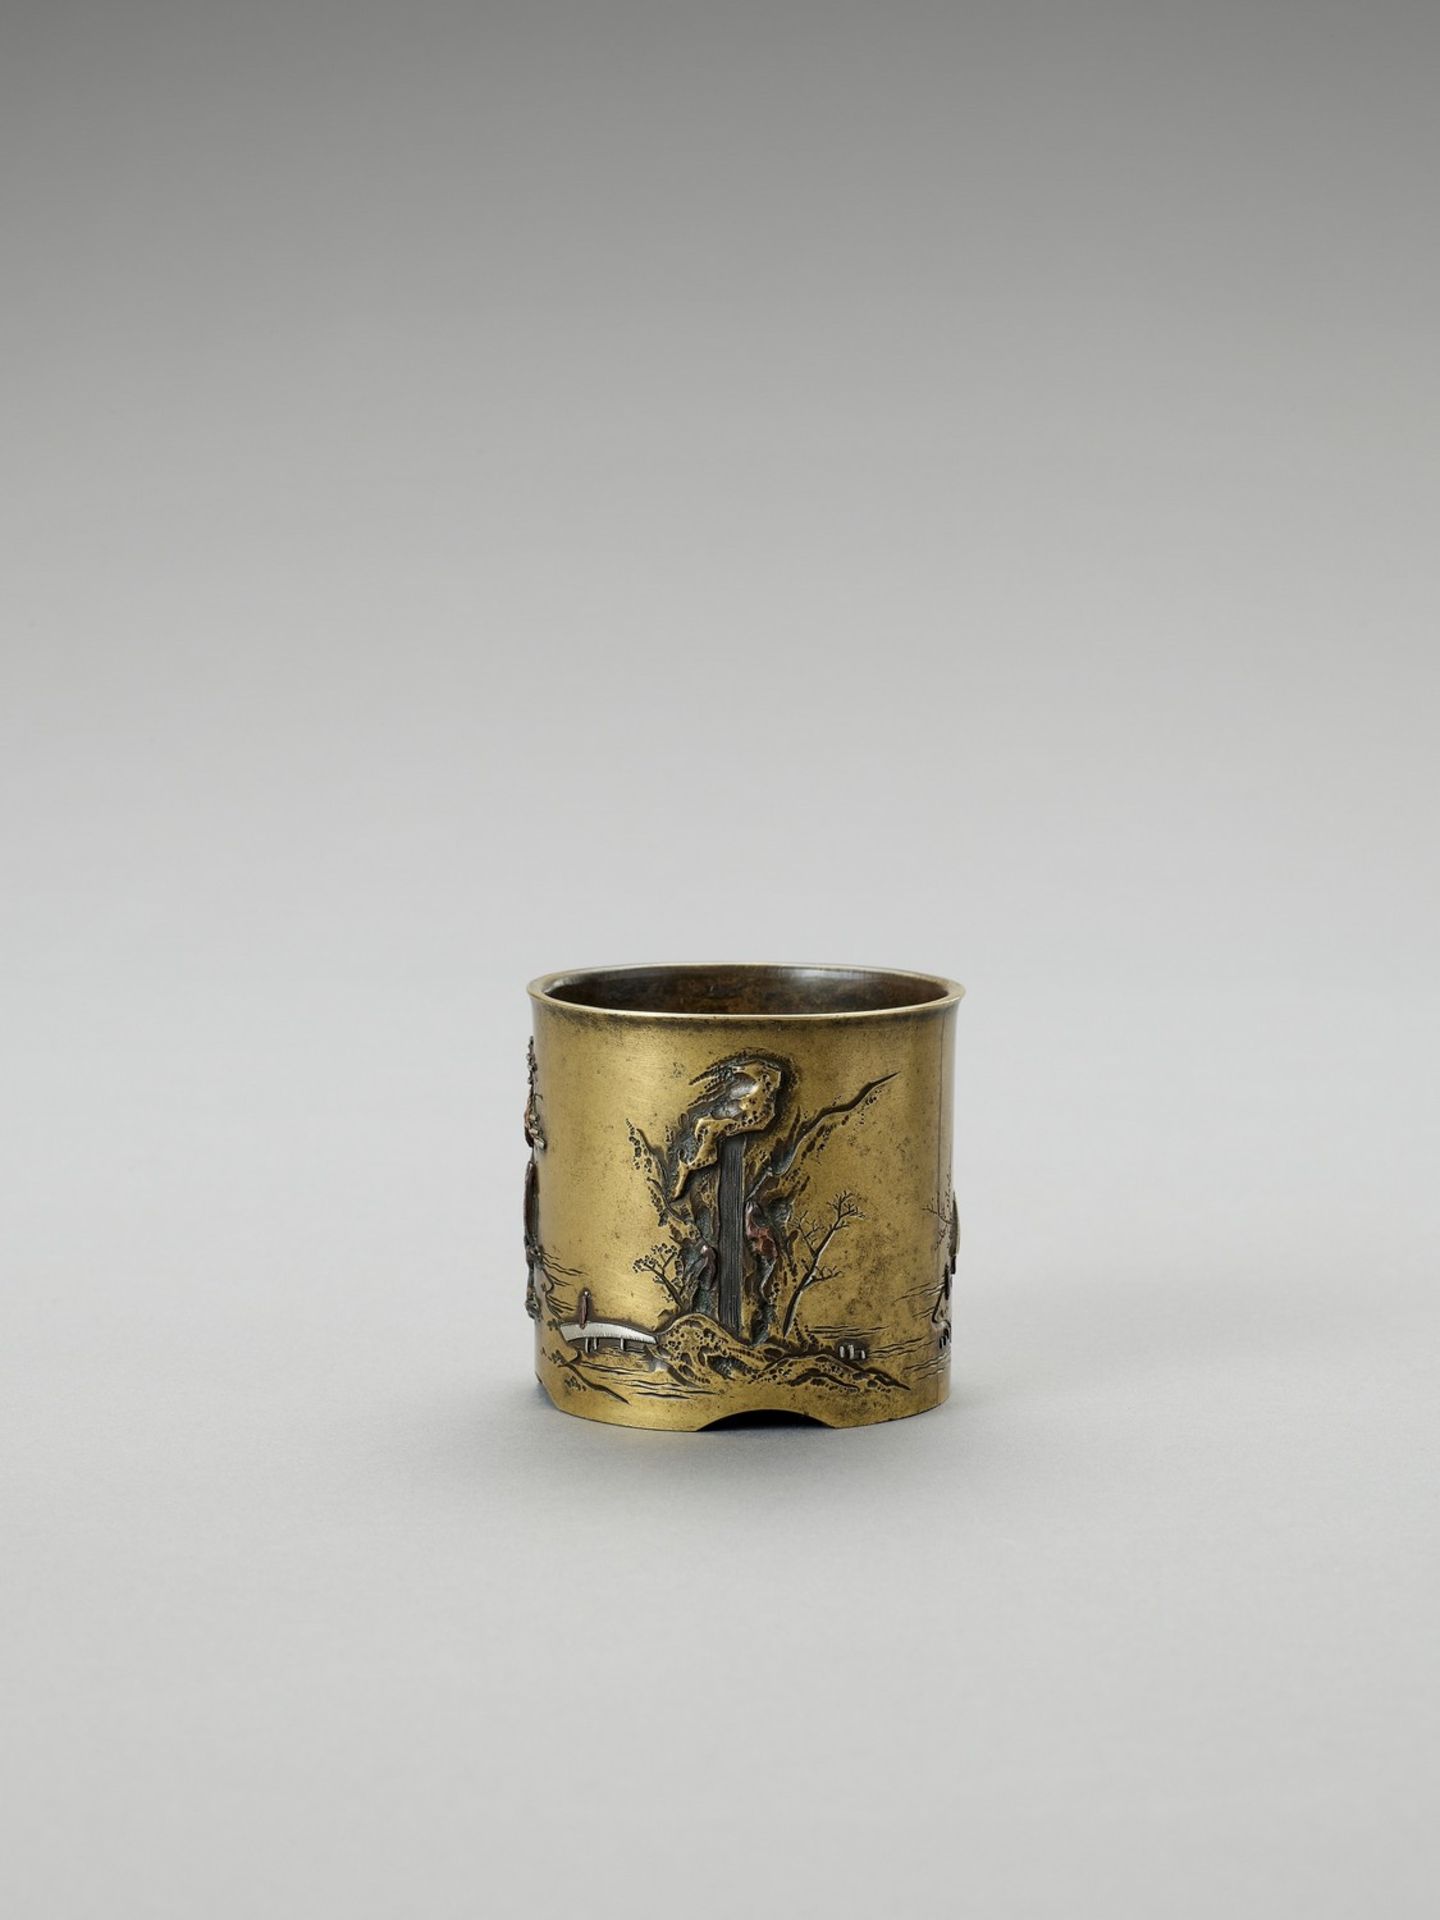 A SMALL SENTOKU VESSEL WITH SILVER AND COPPER INLAYS - Image 2 of 5